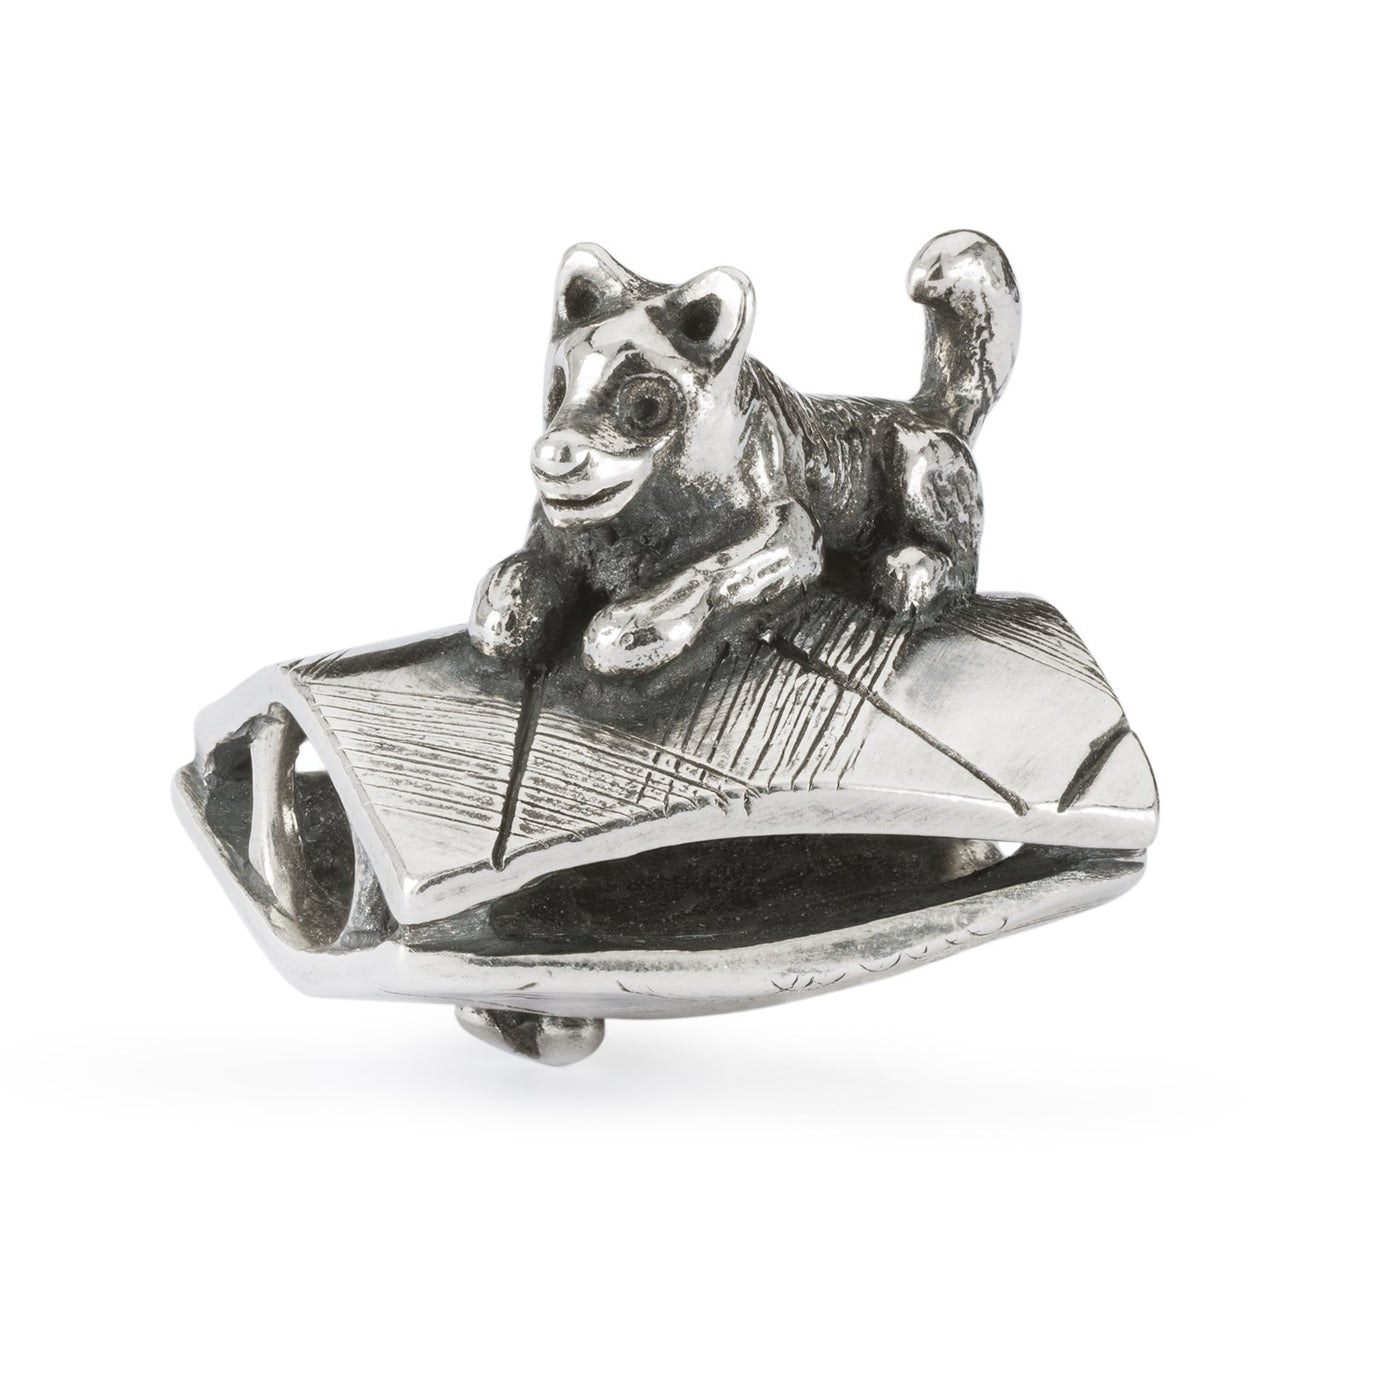 Silver jewellery bead with a dog hiding a bone under a carpet.